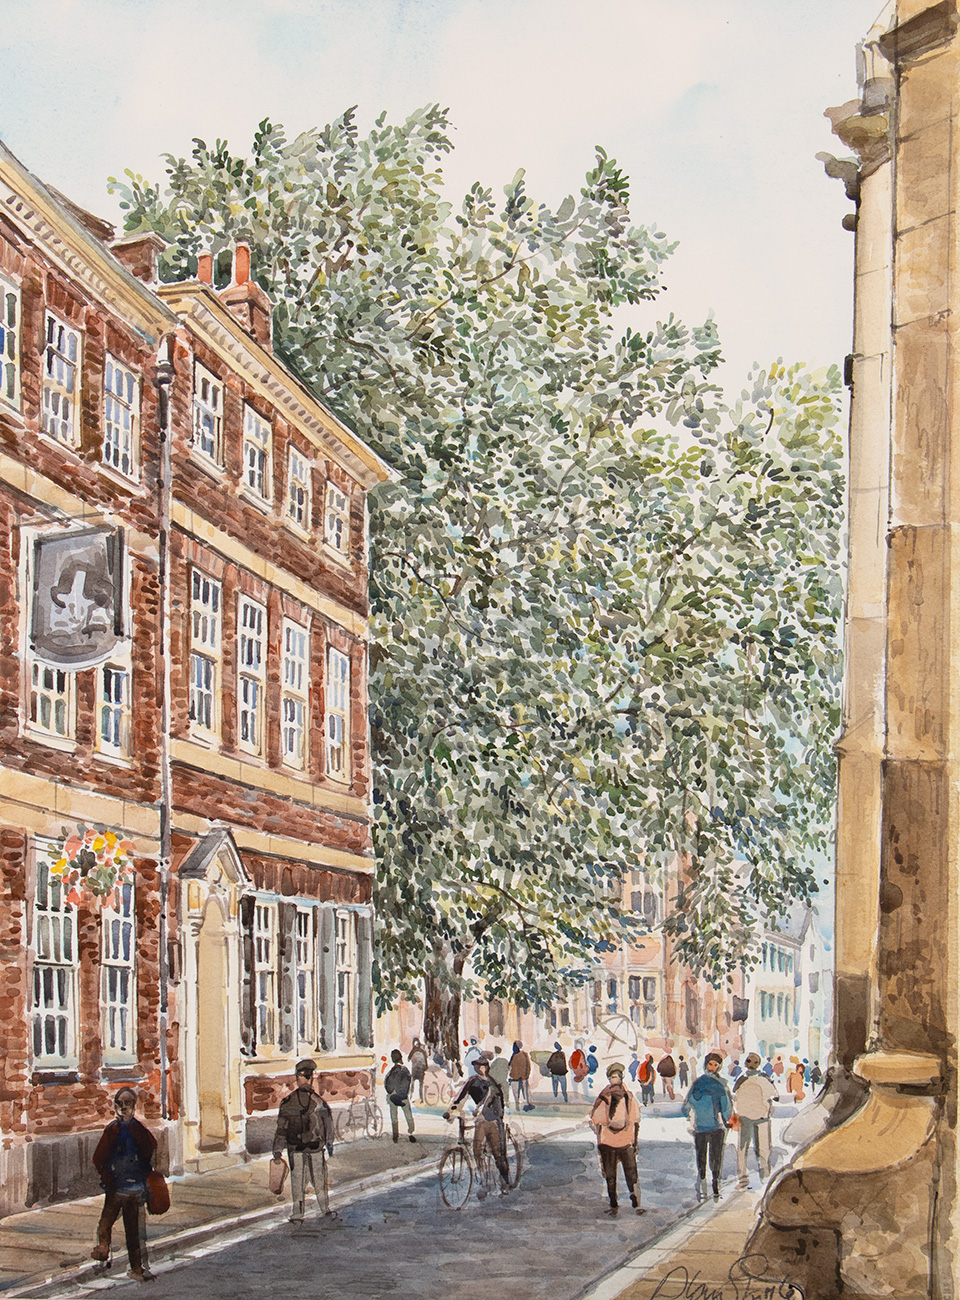 Alan Stuttle, Watercolour, High Petergate, York, click to enlarge